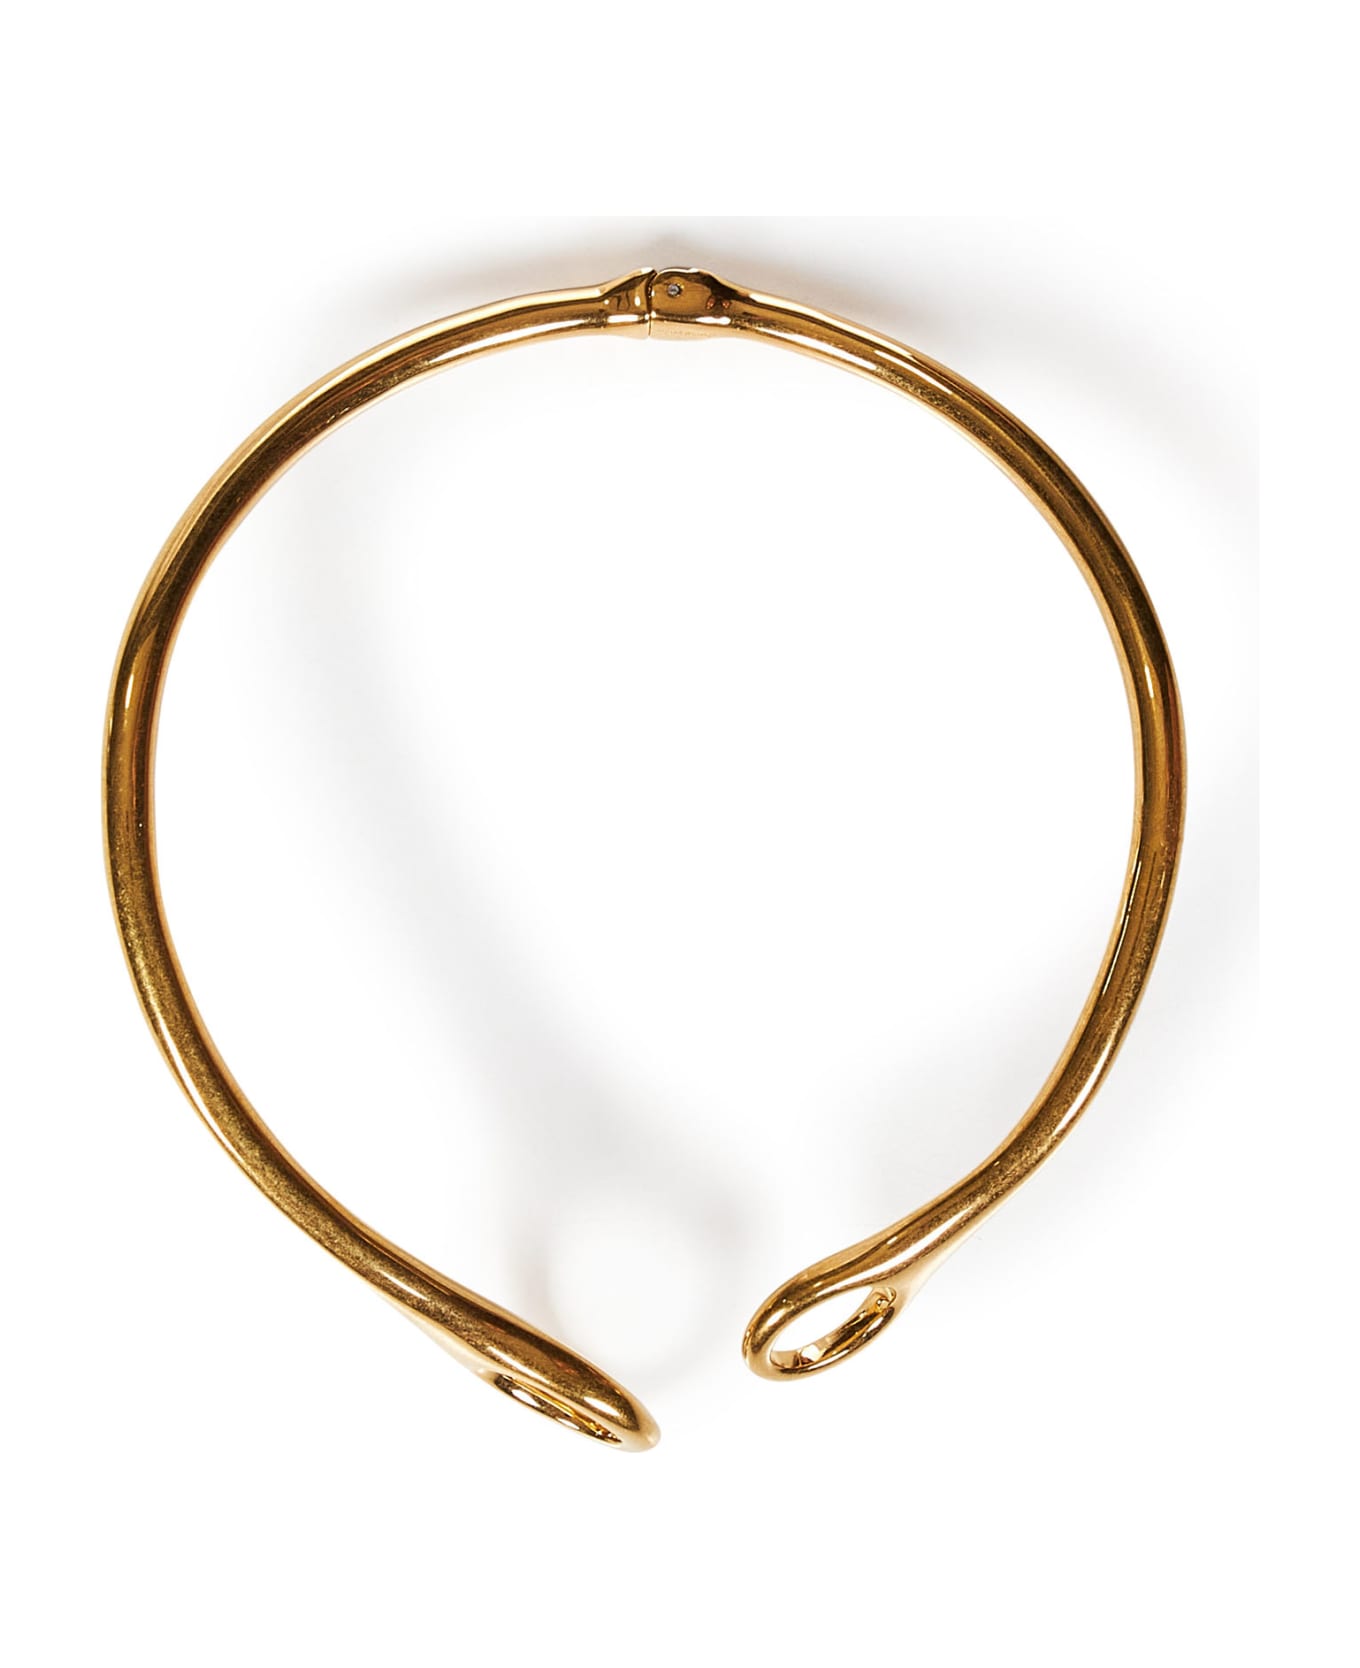 Tom Ford Hera Necklace - Golden